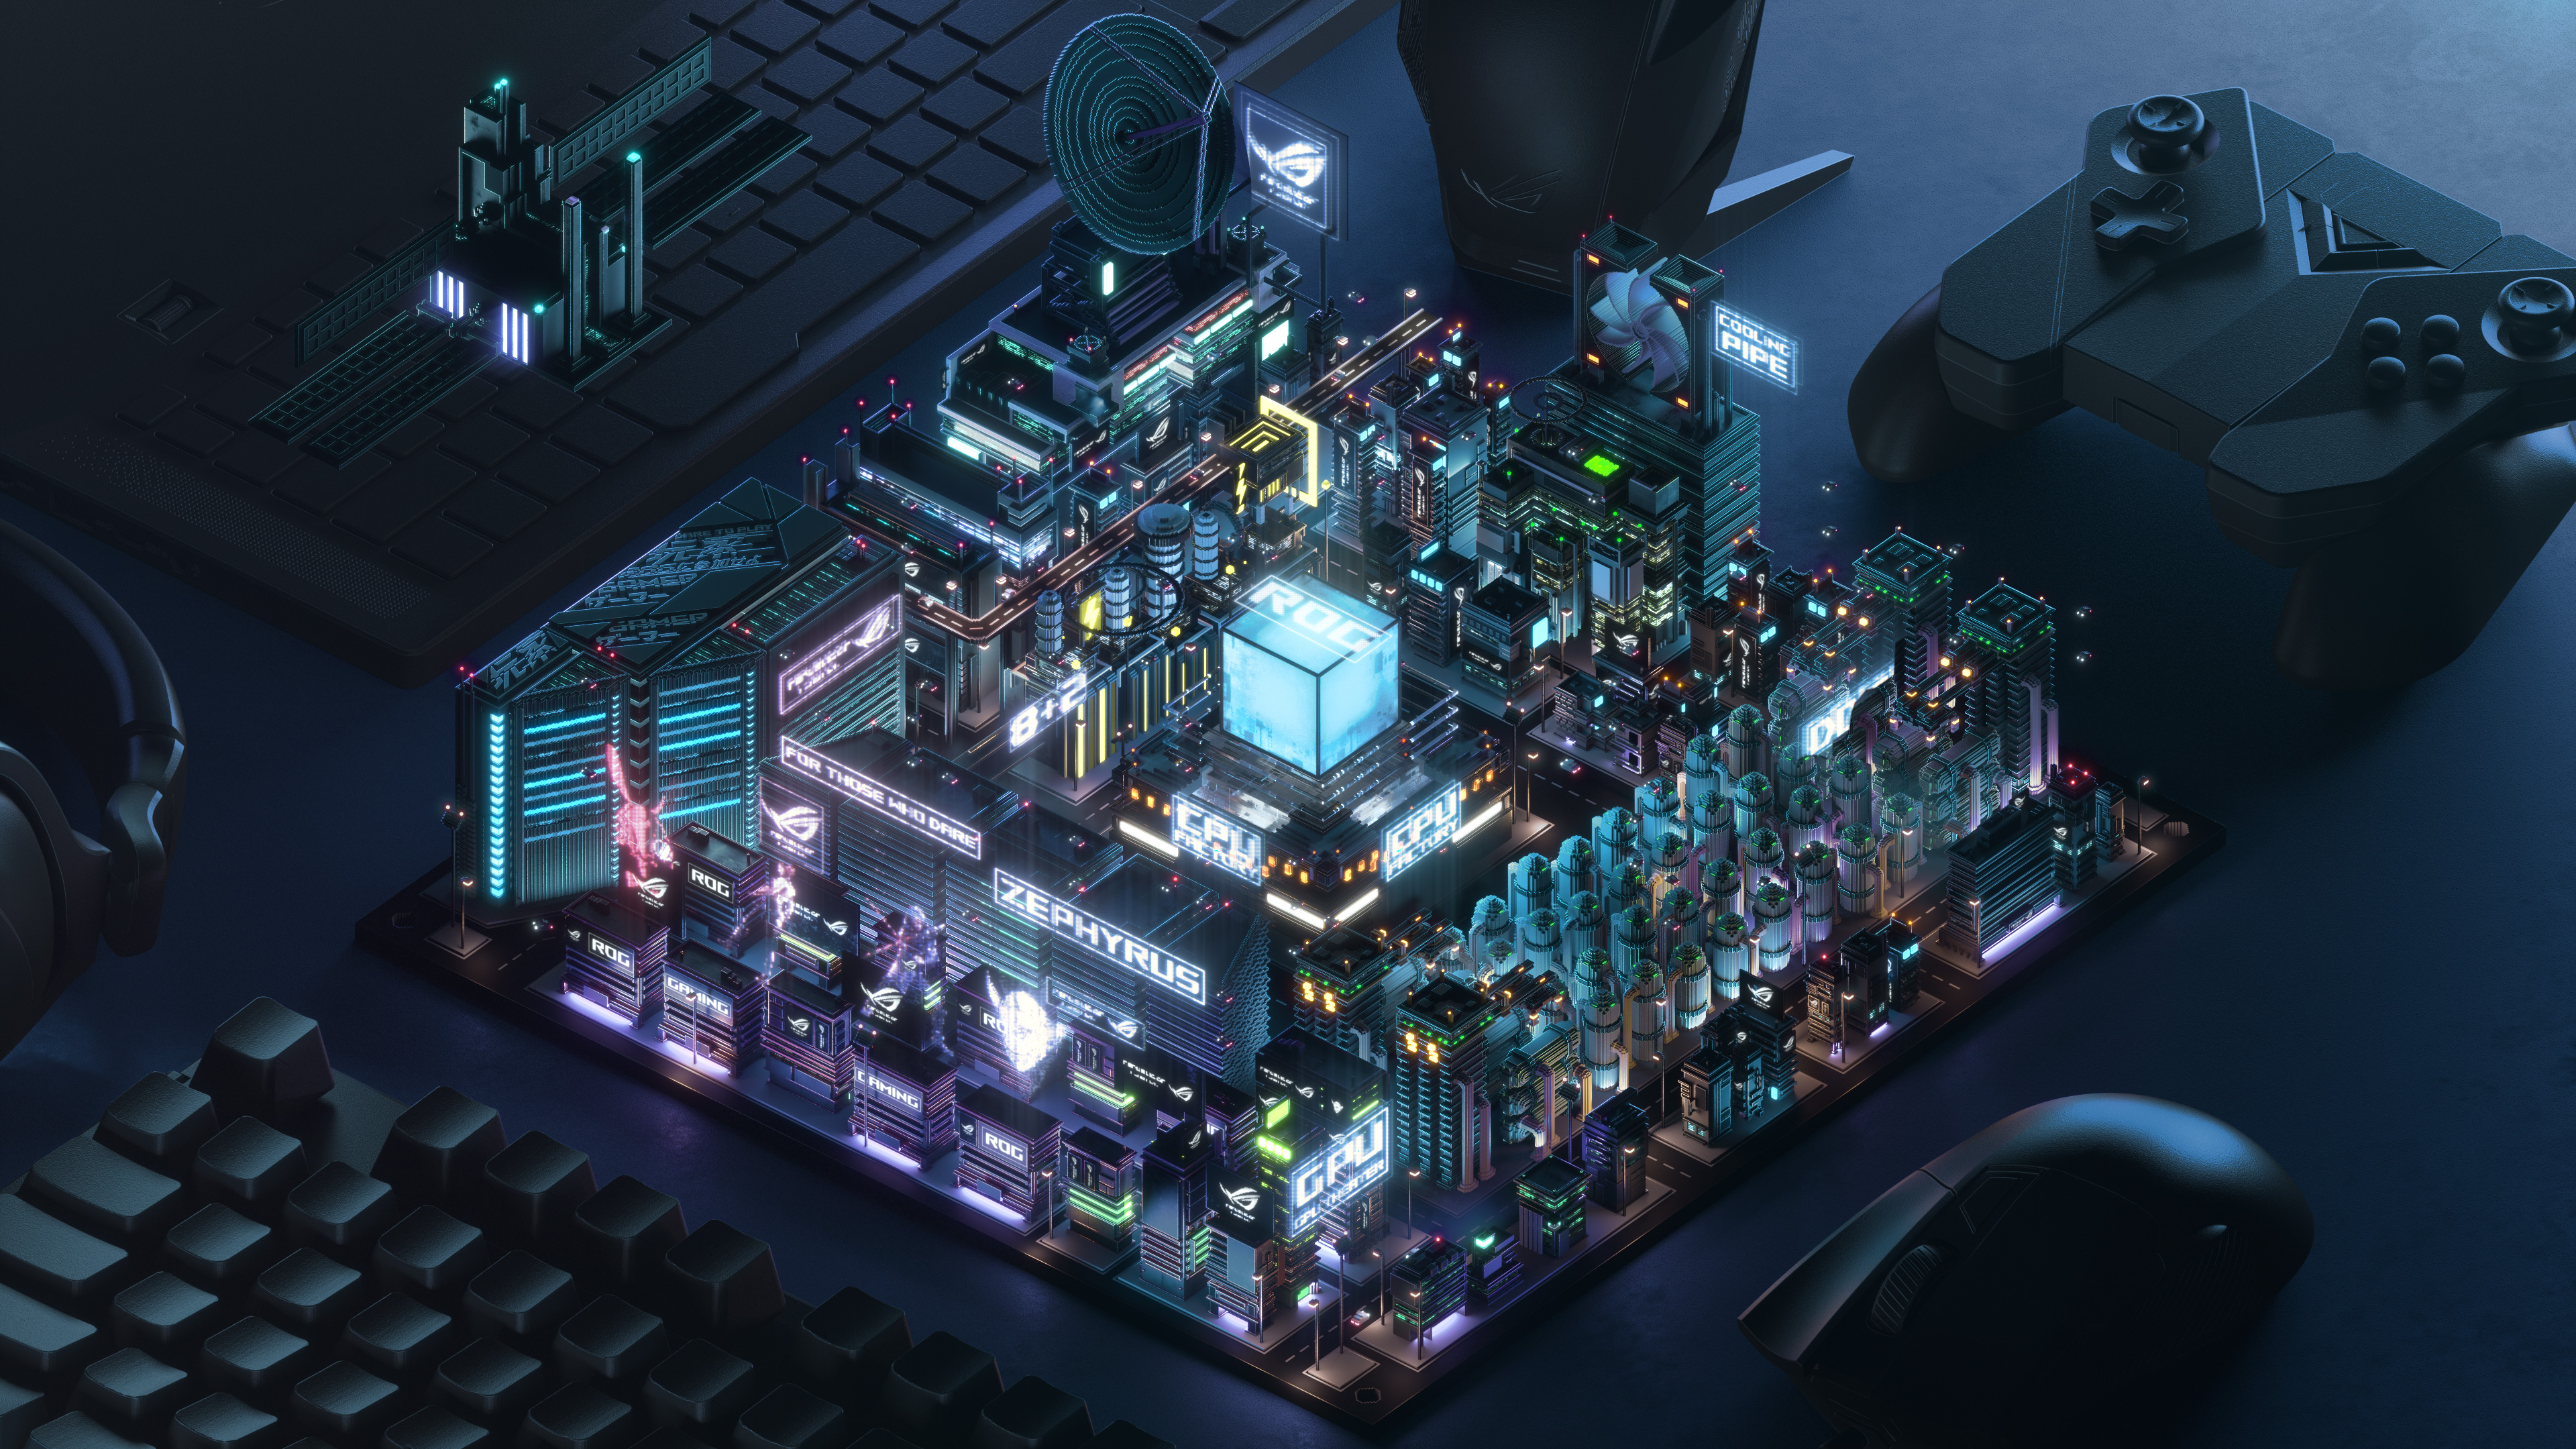 Motherboards Neon Neon City ASUS Republic Of Gamers Controllers Computer Mice Keyboards Lights Tech 3840x2160